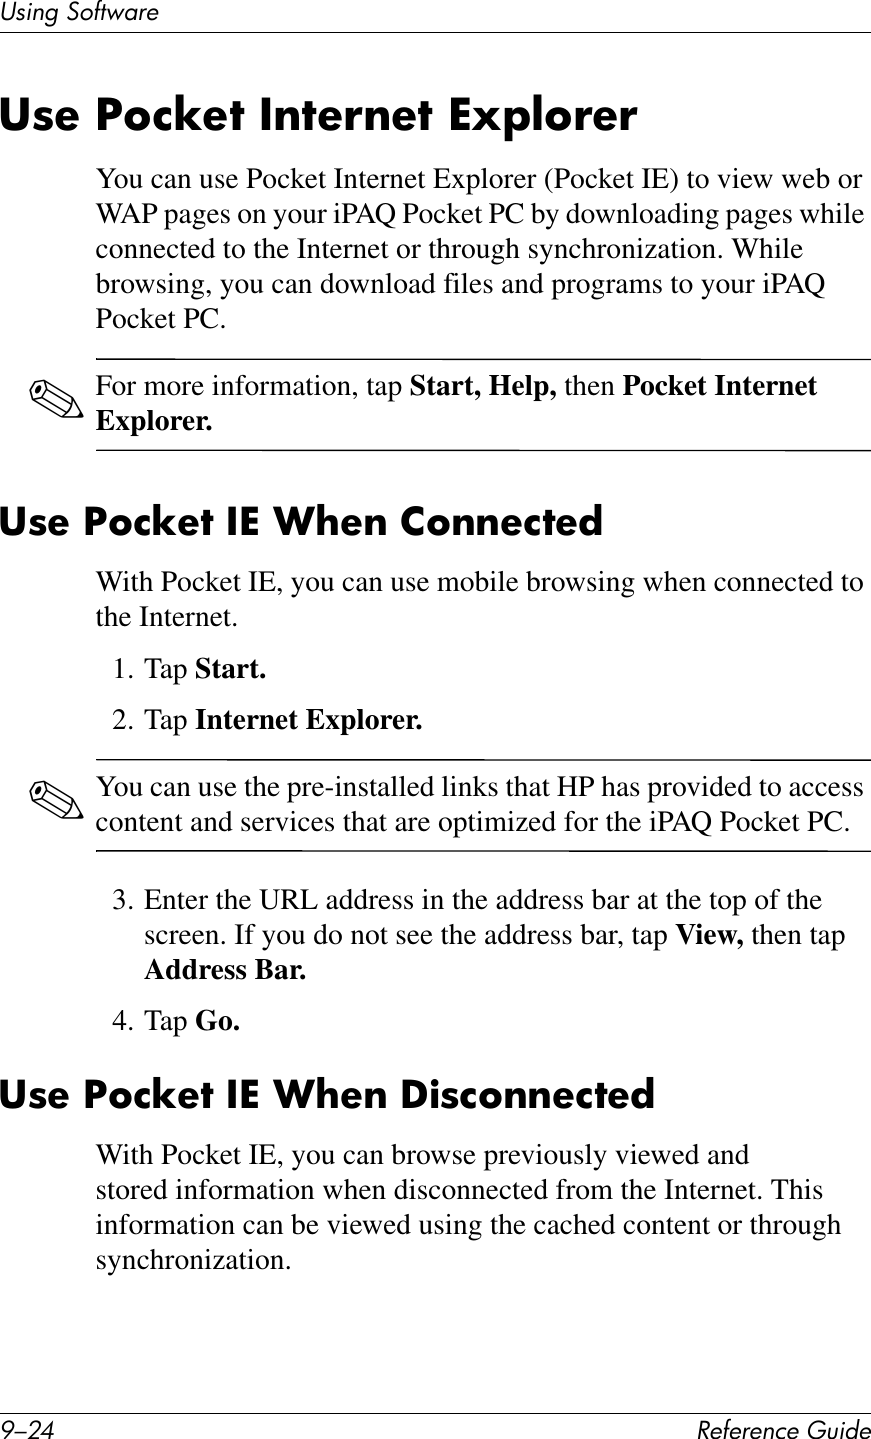 H/0C !&quot;#&quot;$&quot;%&amp;&quot;&apos;()*+&quot;UL*%2&apos;37#1V4$&quot;38&quot;&amp;S6%T&quot;7&amp;/$7&quot;!$&quot;7&amp;^QF@6!&quot;!You can use Pocket Internet Explorer (Pocket IE) to view web or WAP pages on your iPAQ Pocket PC by downloading pages while connected to the Internet or through synchronization. While browsing, you can download files and programs to your iPAQ Pocket PC.✎For more information, tap Start, Help, then Pocket Internet Explorer.38&quot;&amp;S6%T&quot;7&amp;/^&amp;+?&quot;$&amp;26$$&quot;%7&quot;*With Pocket IE, you can use mobile browsing when connected to the Internet.1. Tap Start.2. Tap Internet Explorer.✎You can use the pre-installed links that HP has provided to access content and services that are optimized for the iPAQ Pocket PC.3. Enter the URL address in the address bar at the top of the screen. If you do not see the address bar, tap View, then tap Address Bar.4. Tap Go.38&quot;&amp;S6%T&quot;7&amp;/^&amp;+?&quot;$&amp;U)8%6$$&quot;%7&quot;*With Pocket IE, you can browse previously viewed and stored information when disconnected from the Internet. This information can be viewed using the cached content or through synchronization.